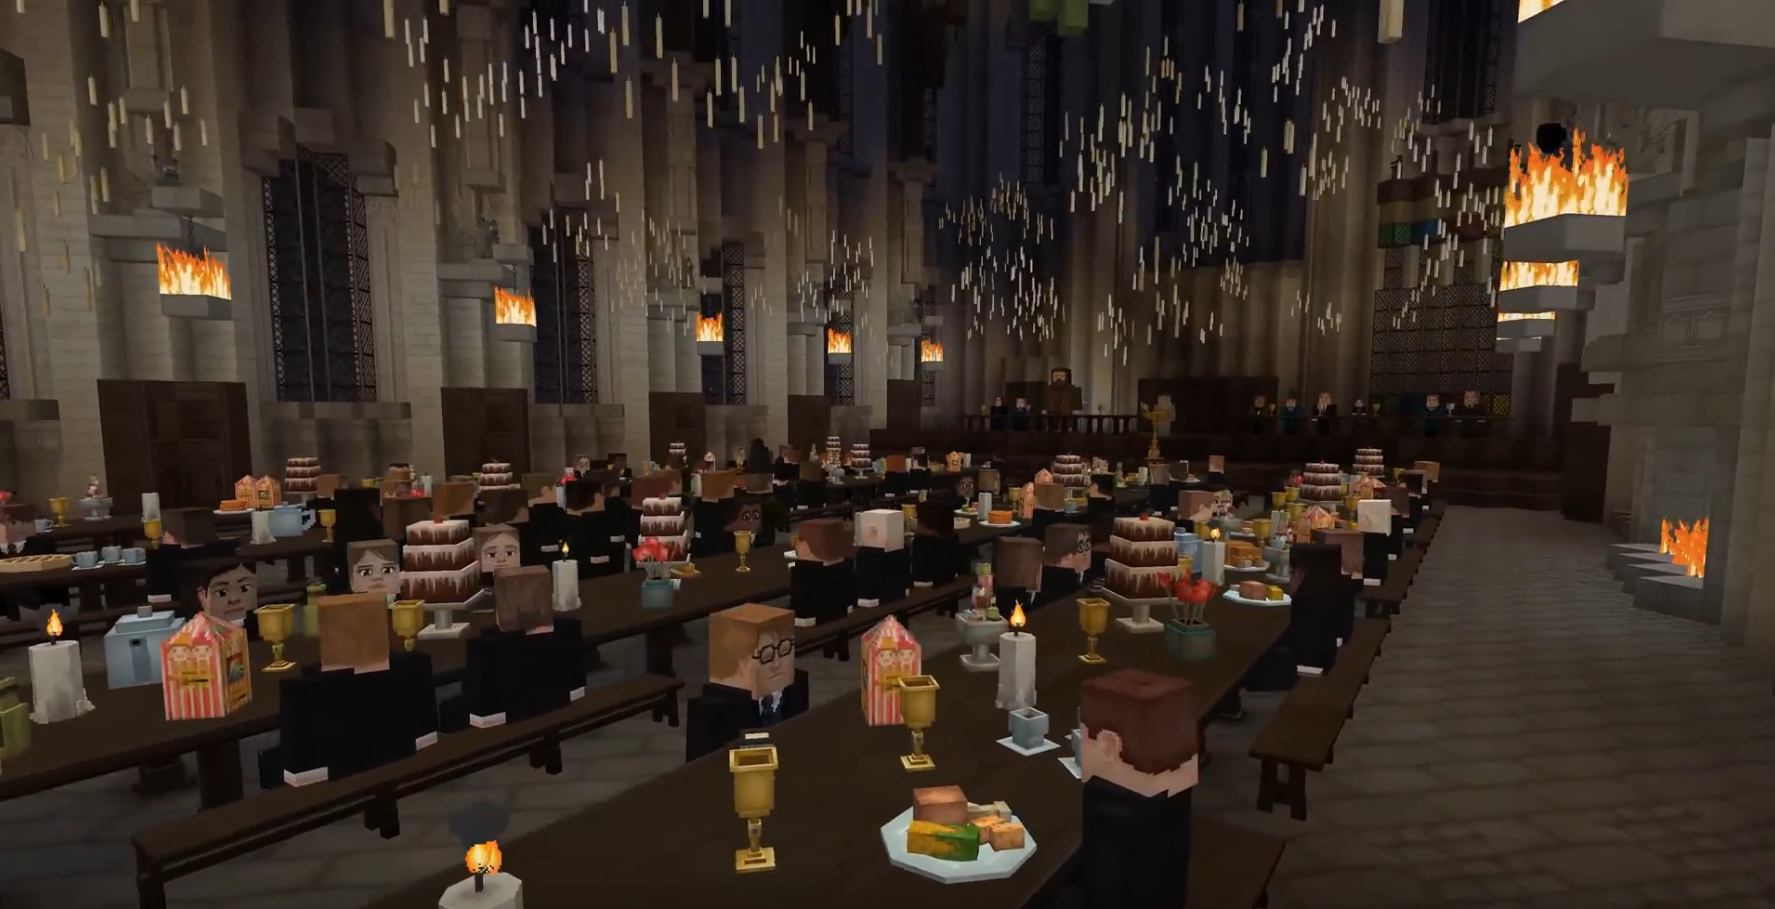 The Harry Potter RPG Inside Minecraft Is Now Officially Complete; A New Trailer Was Just Put Out